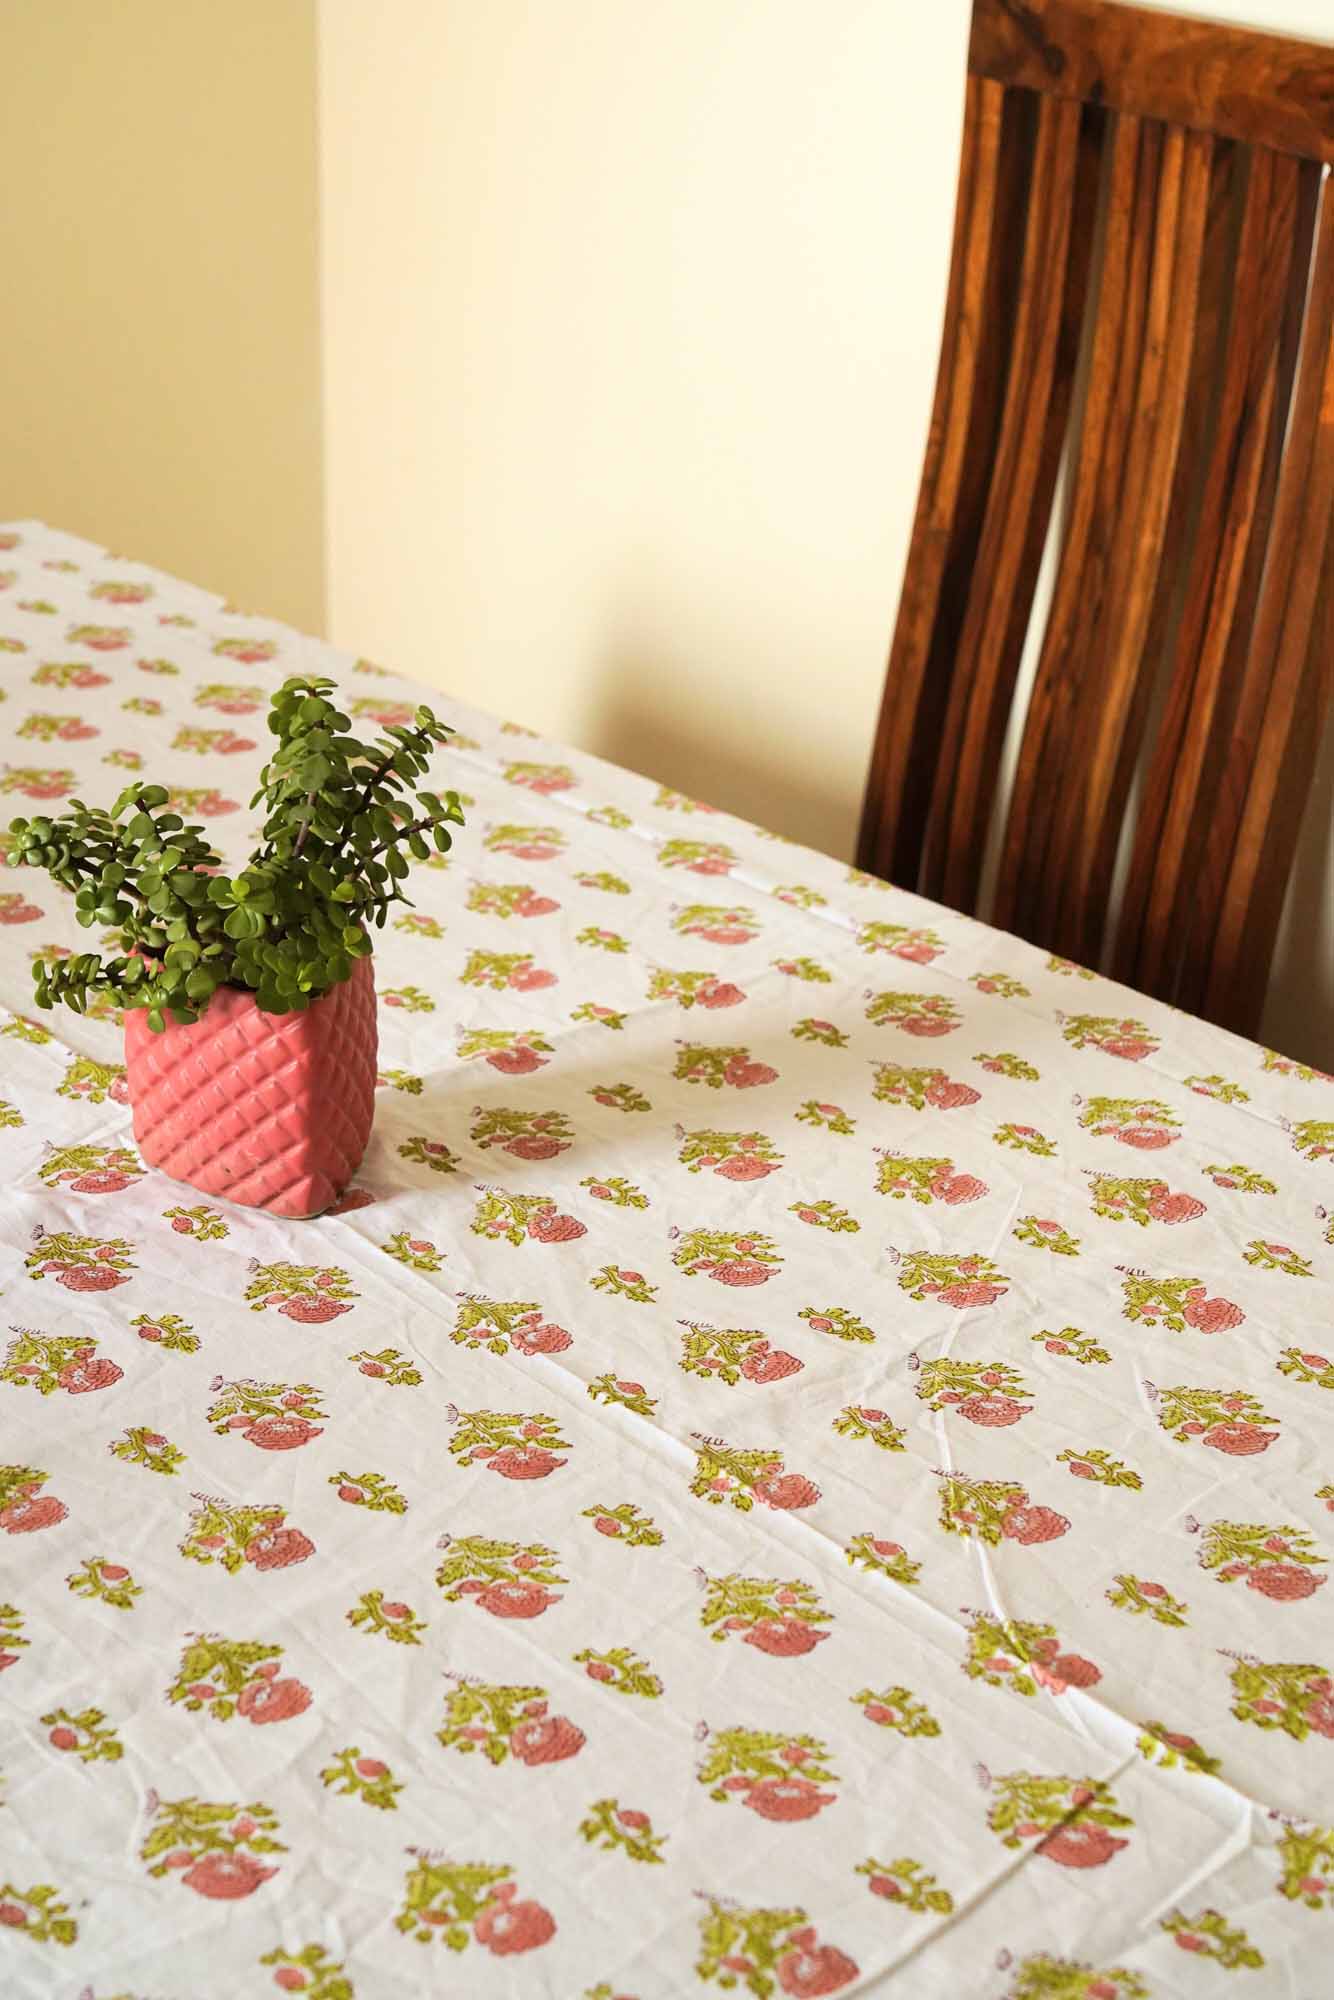 Zoya - The Original Hand-Block Printed Dining Table Cover